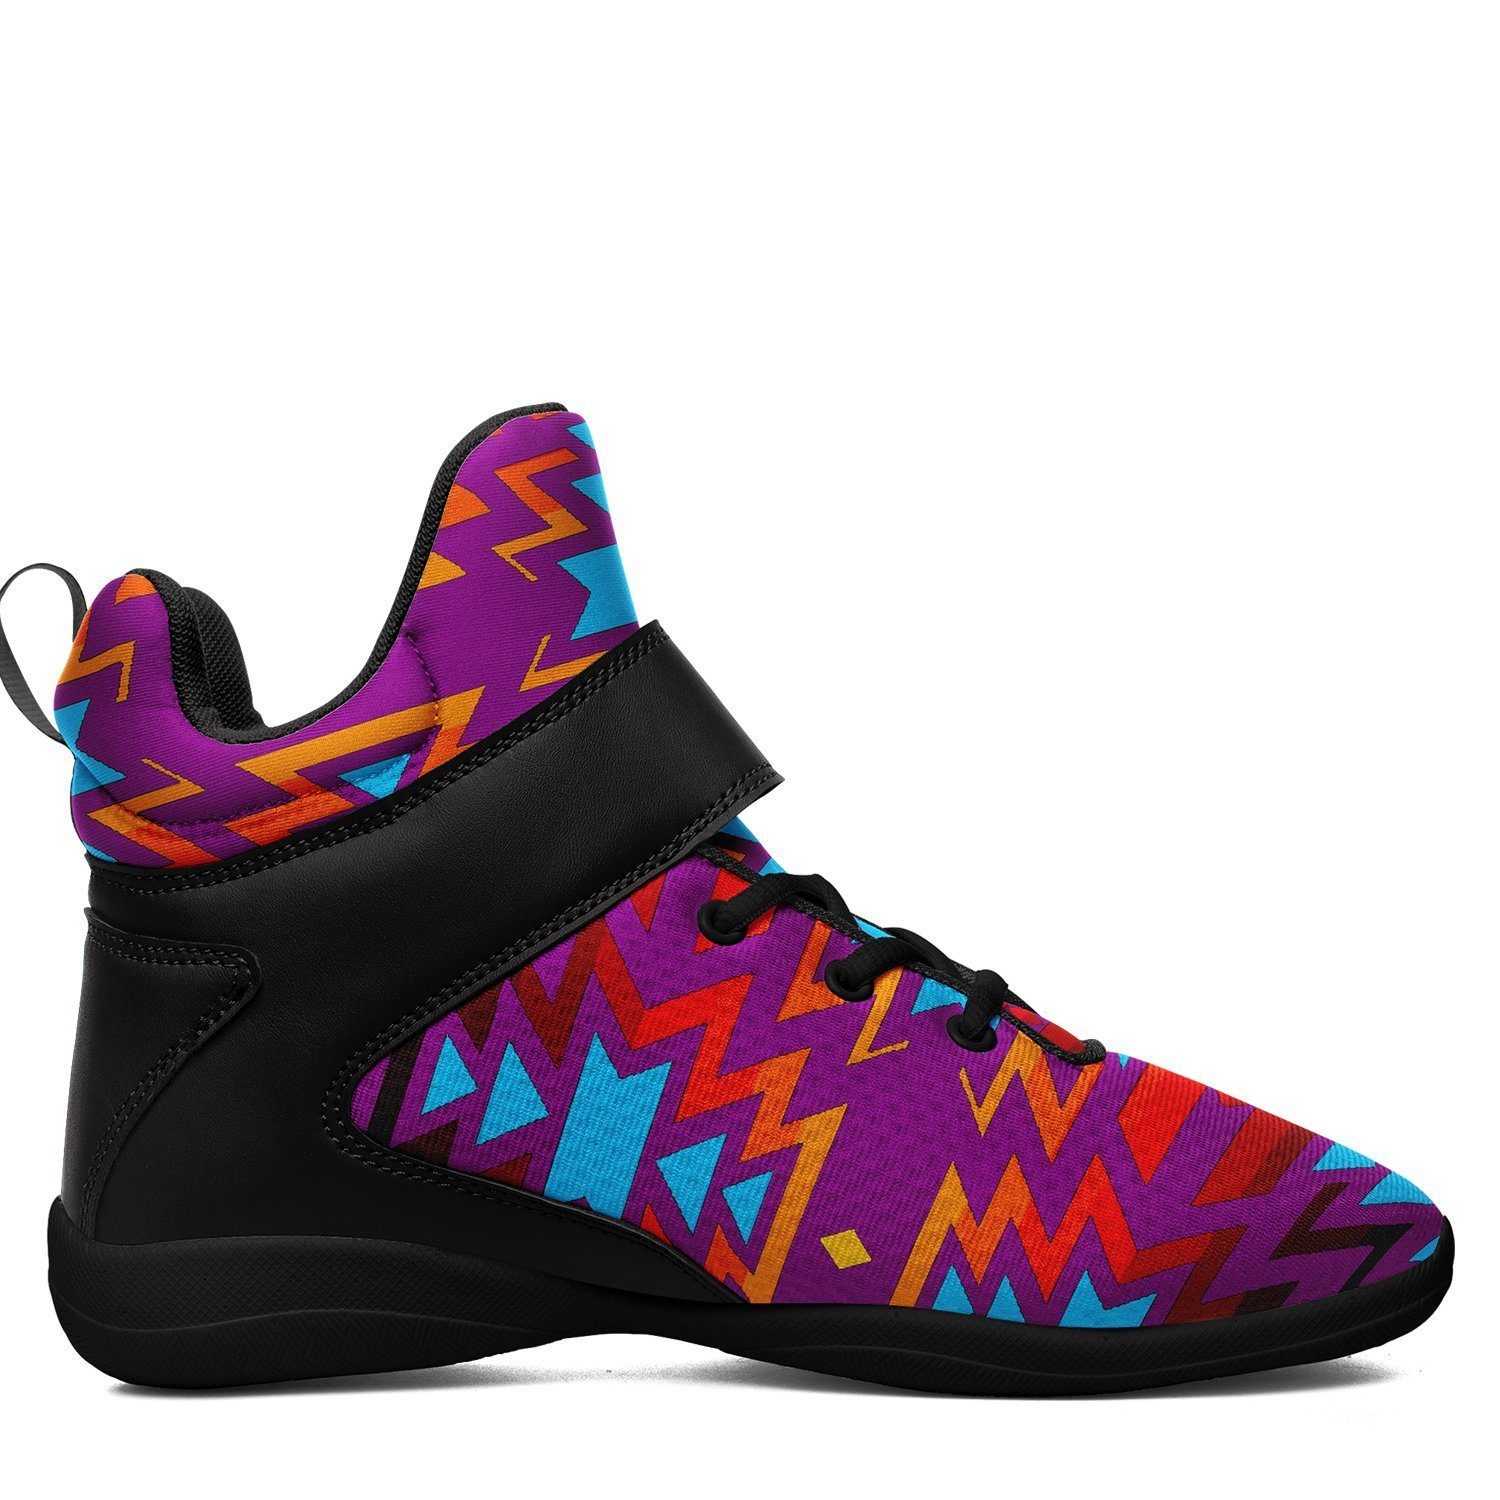 Fire Colors and Turquoise Purple Ipottaa Basketball / Sport High Top Shoes - Black Sole 49 Dzine 